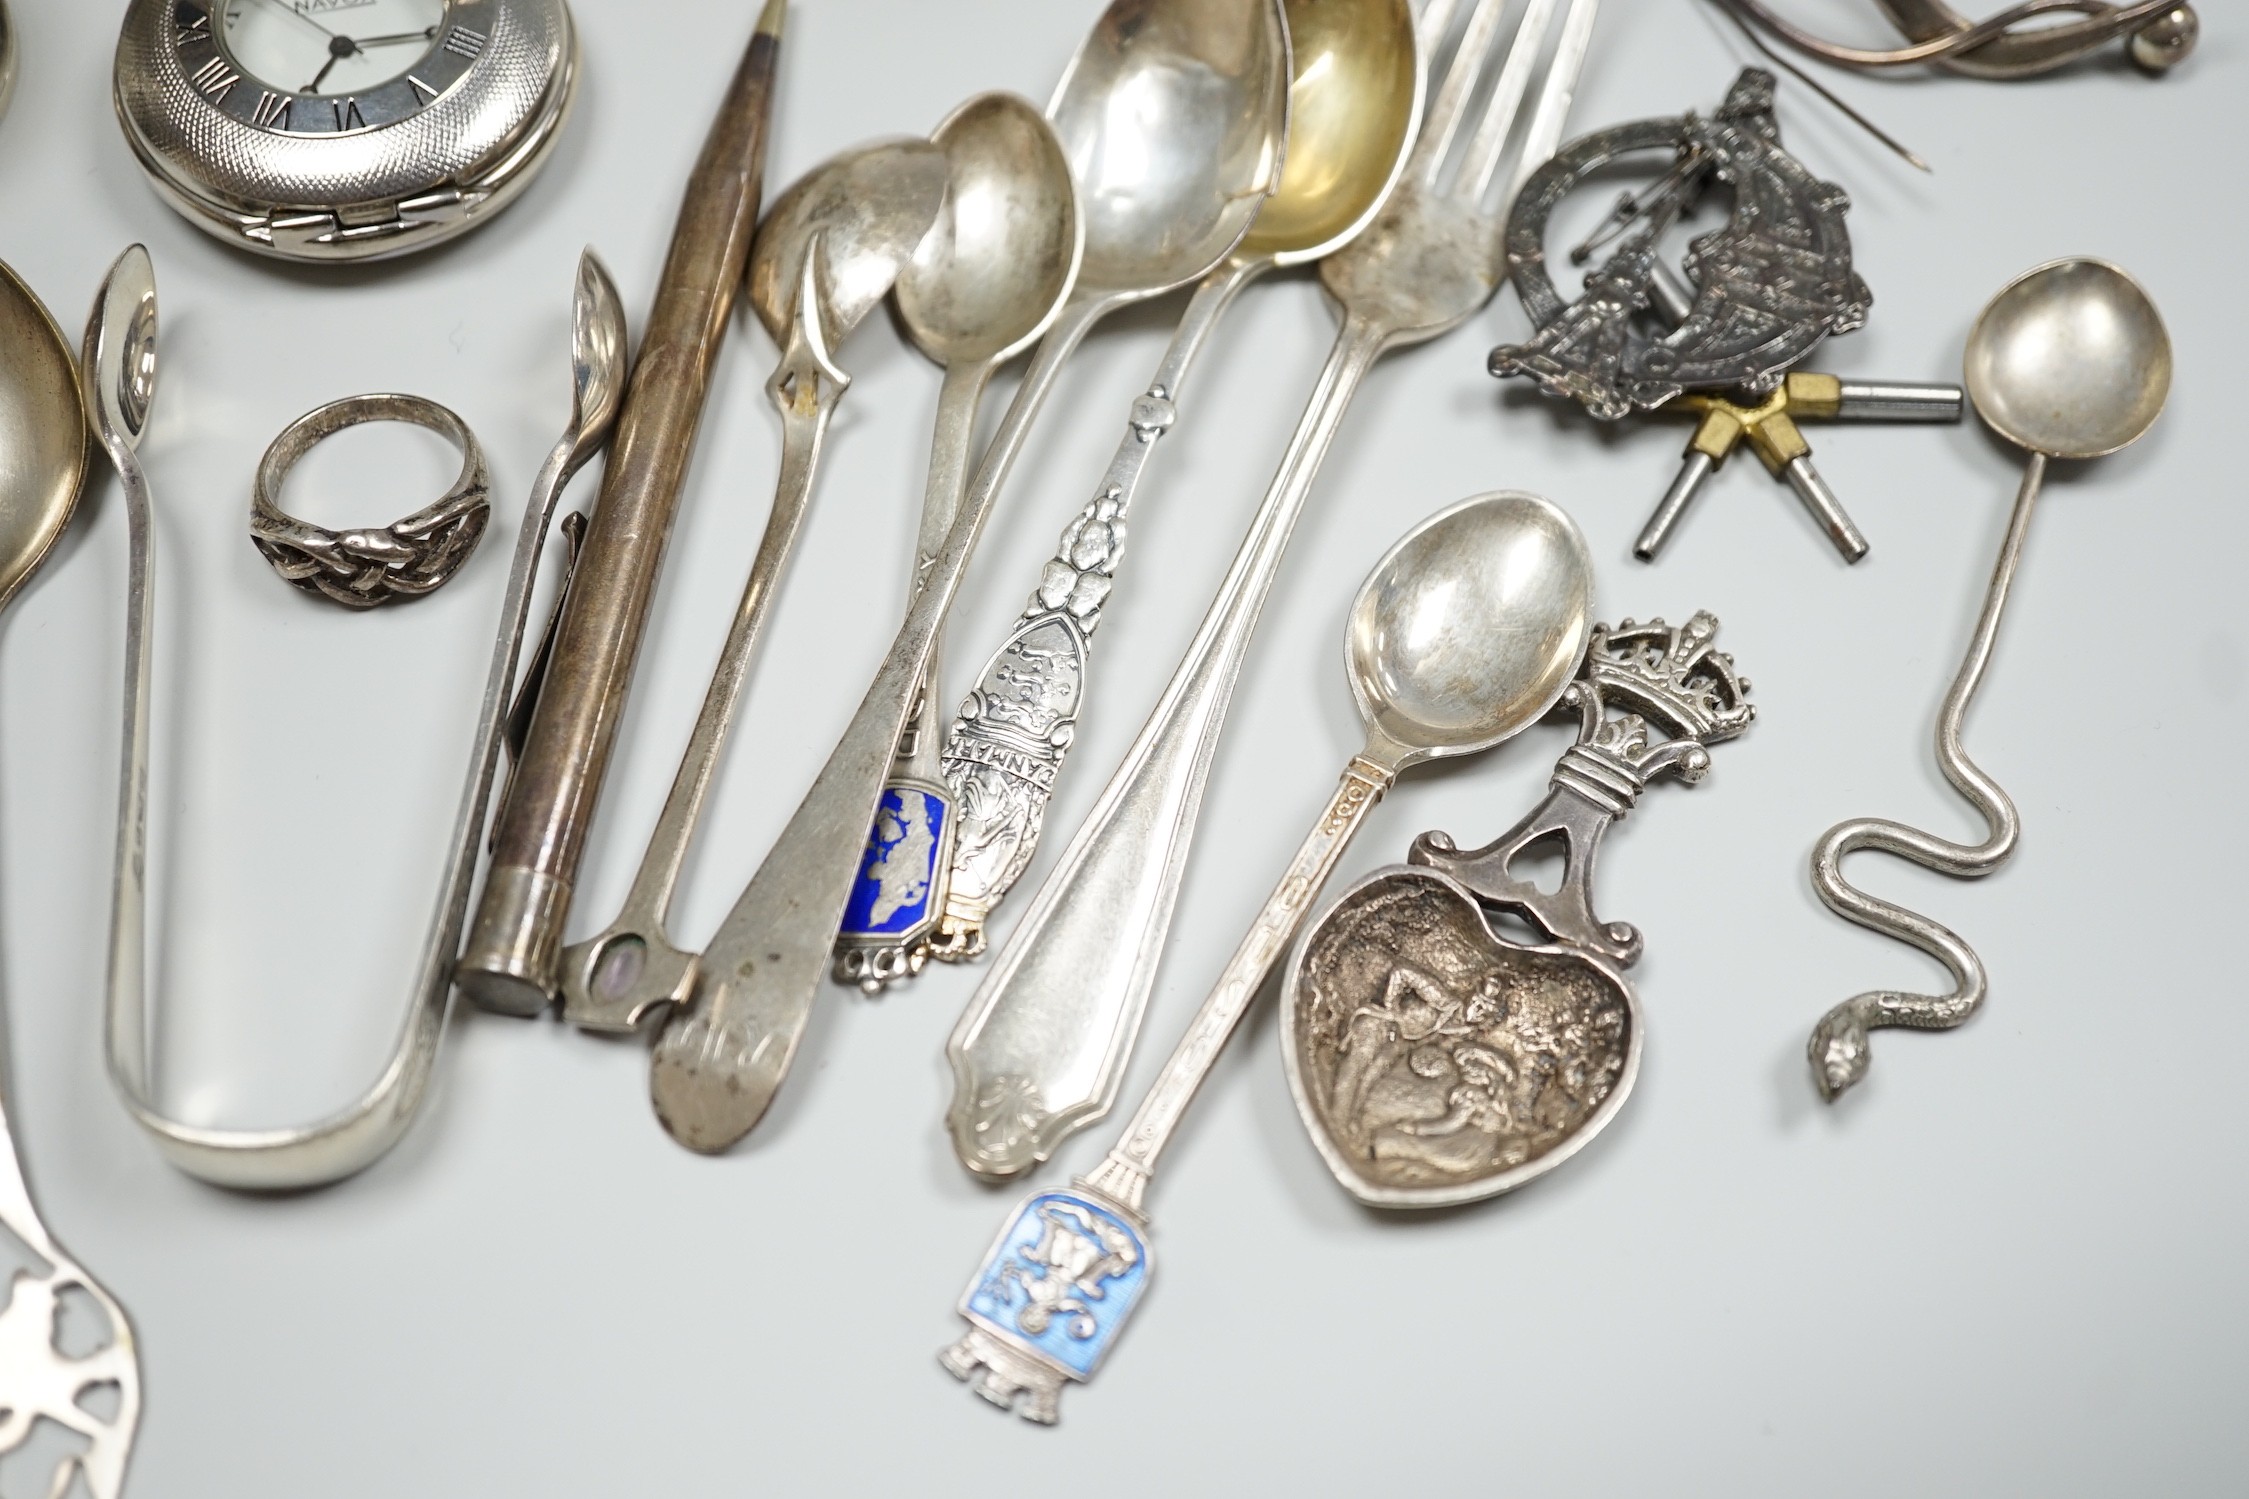 Sundry small silver including two sauceboats, napkin rings, mounted glass condiment bottle, pepperette, pair of silver gilt preserve spoons, minor flatware including white metal, a 1920's Georg Jensen silver cream ladle,